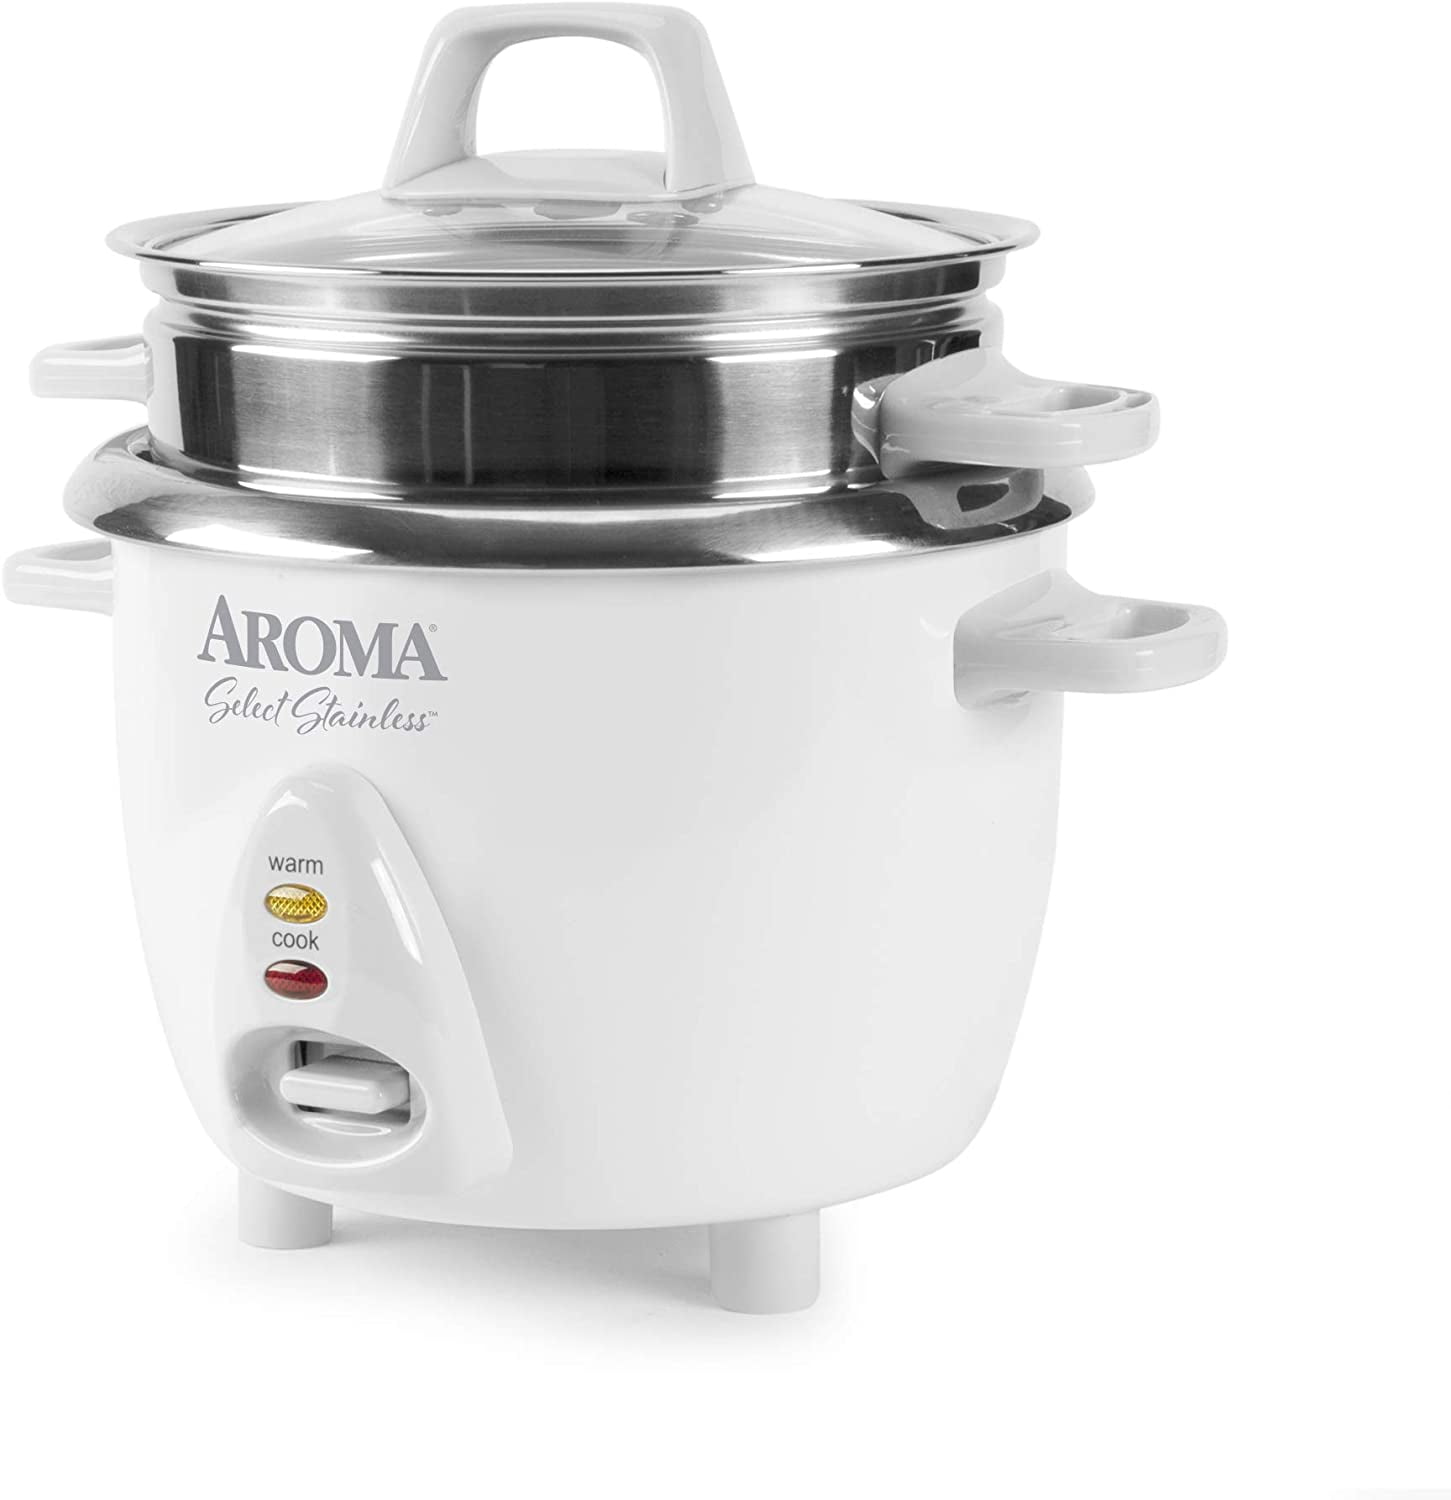 Aroma Housewares Select Stainless Rice Cooker Unboxing & First